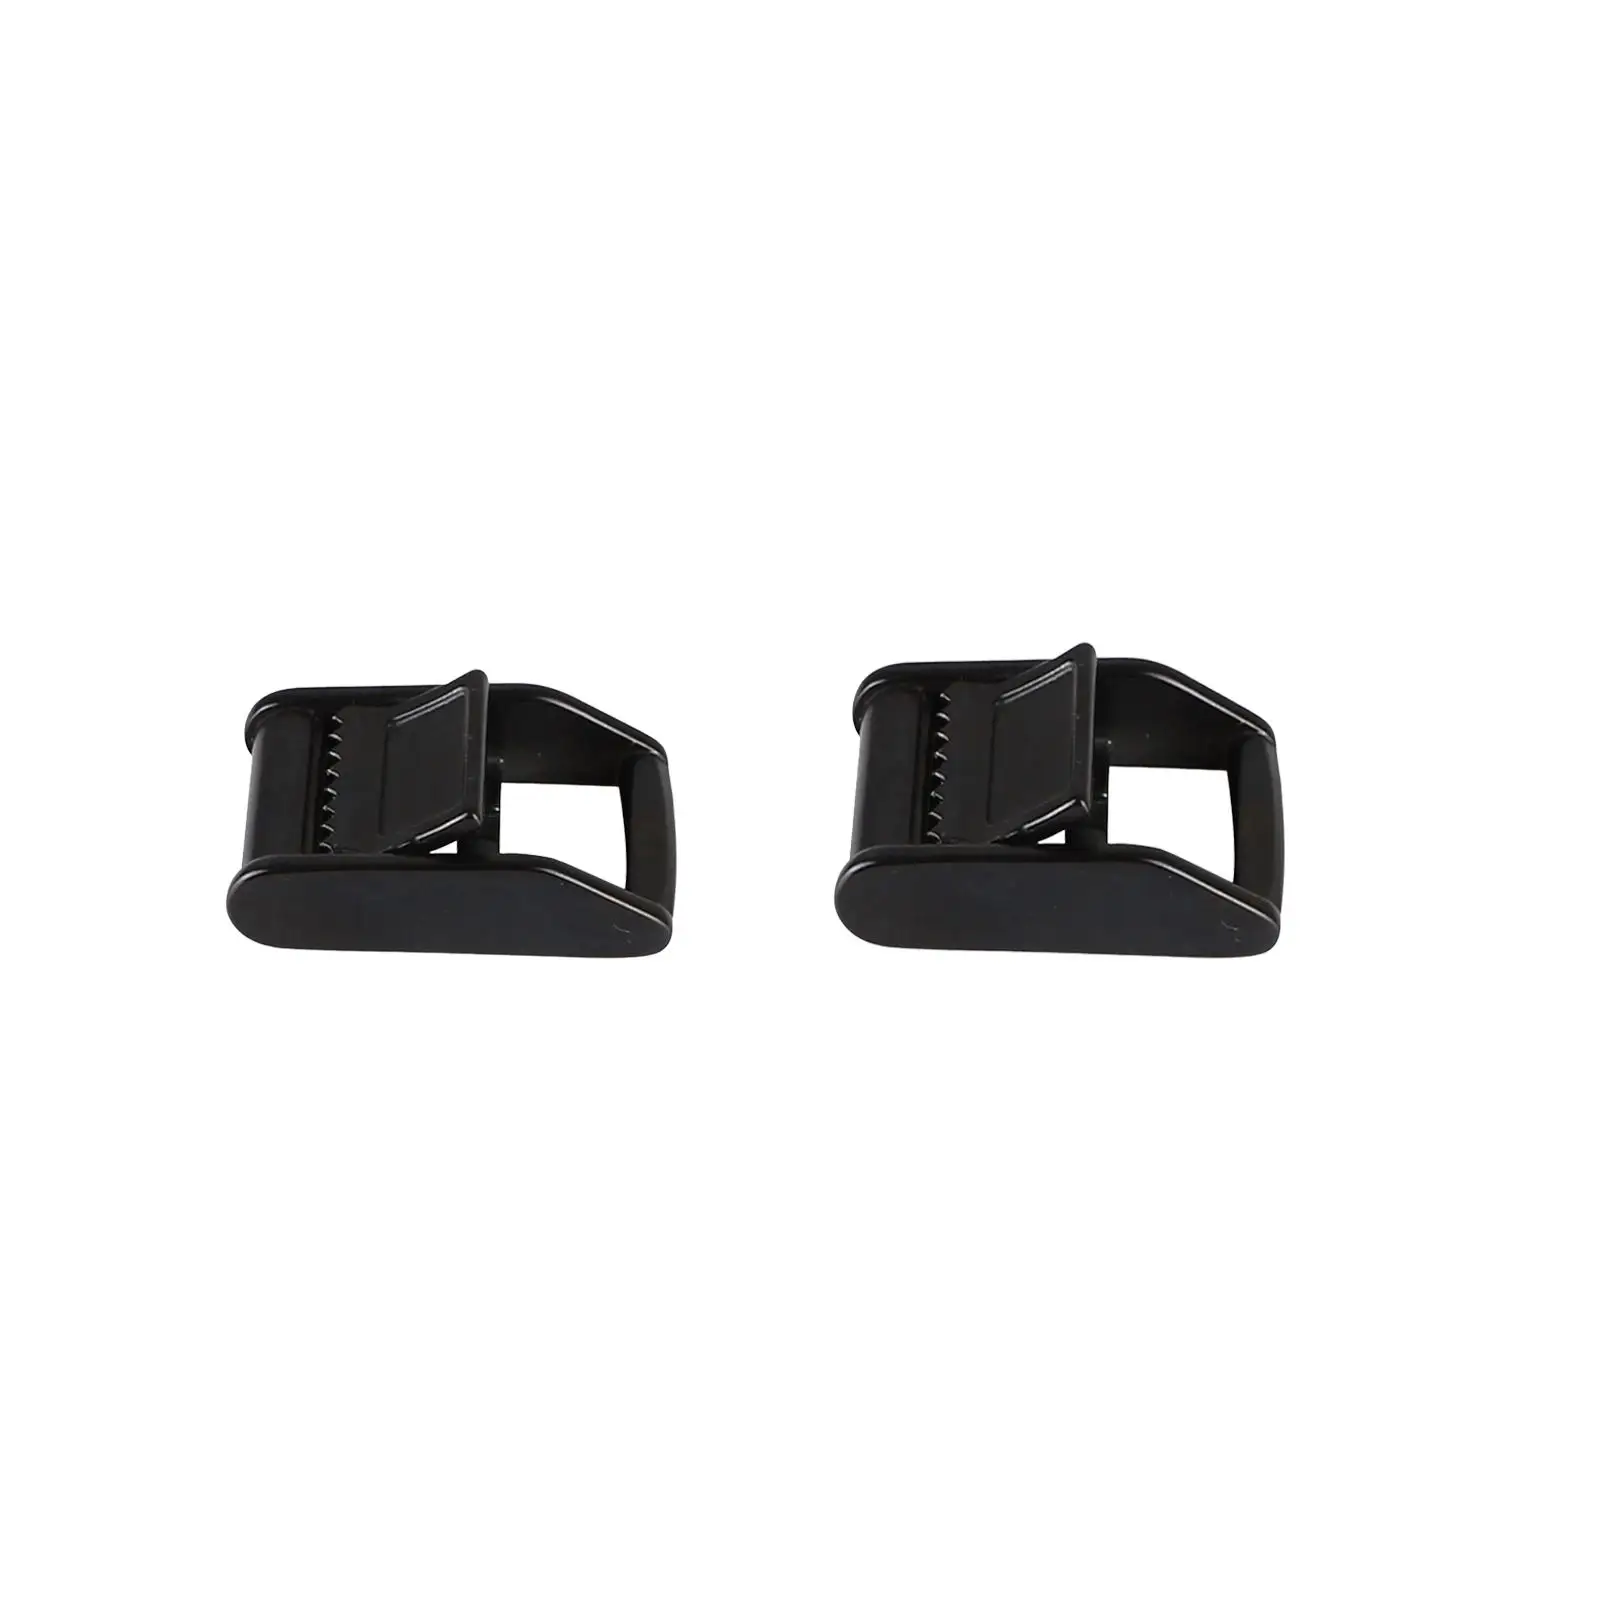 Webbing Buckle Portable Tightening Buckle Straps for Backpack Boat Covers Cargo Lashing Tightening Luggage Package Webbing Strap